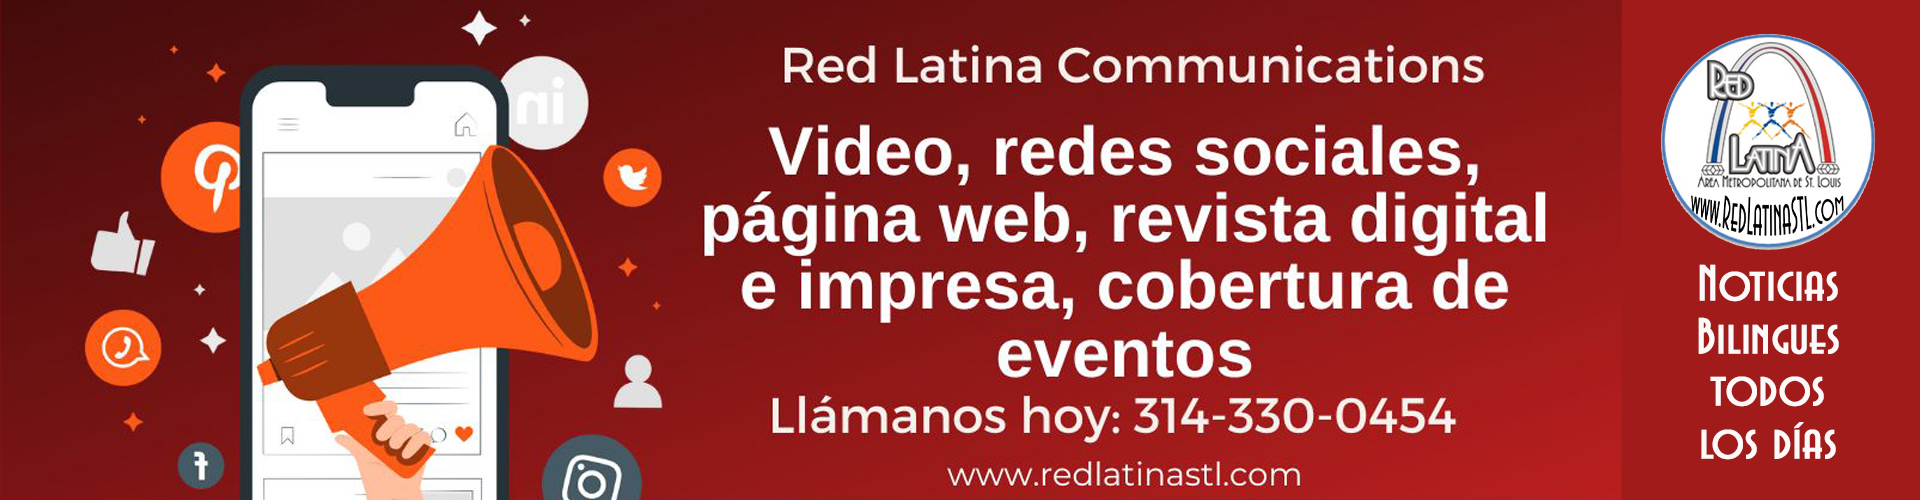 Red Latina email